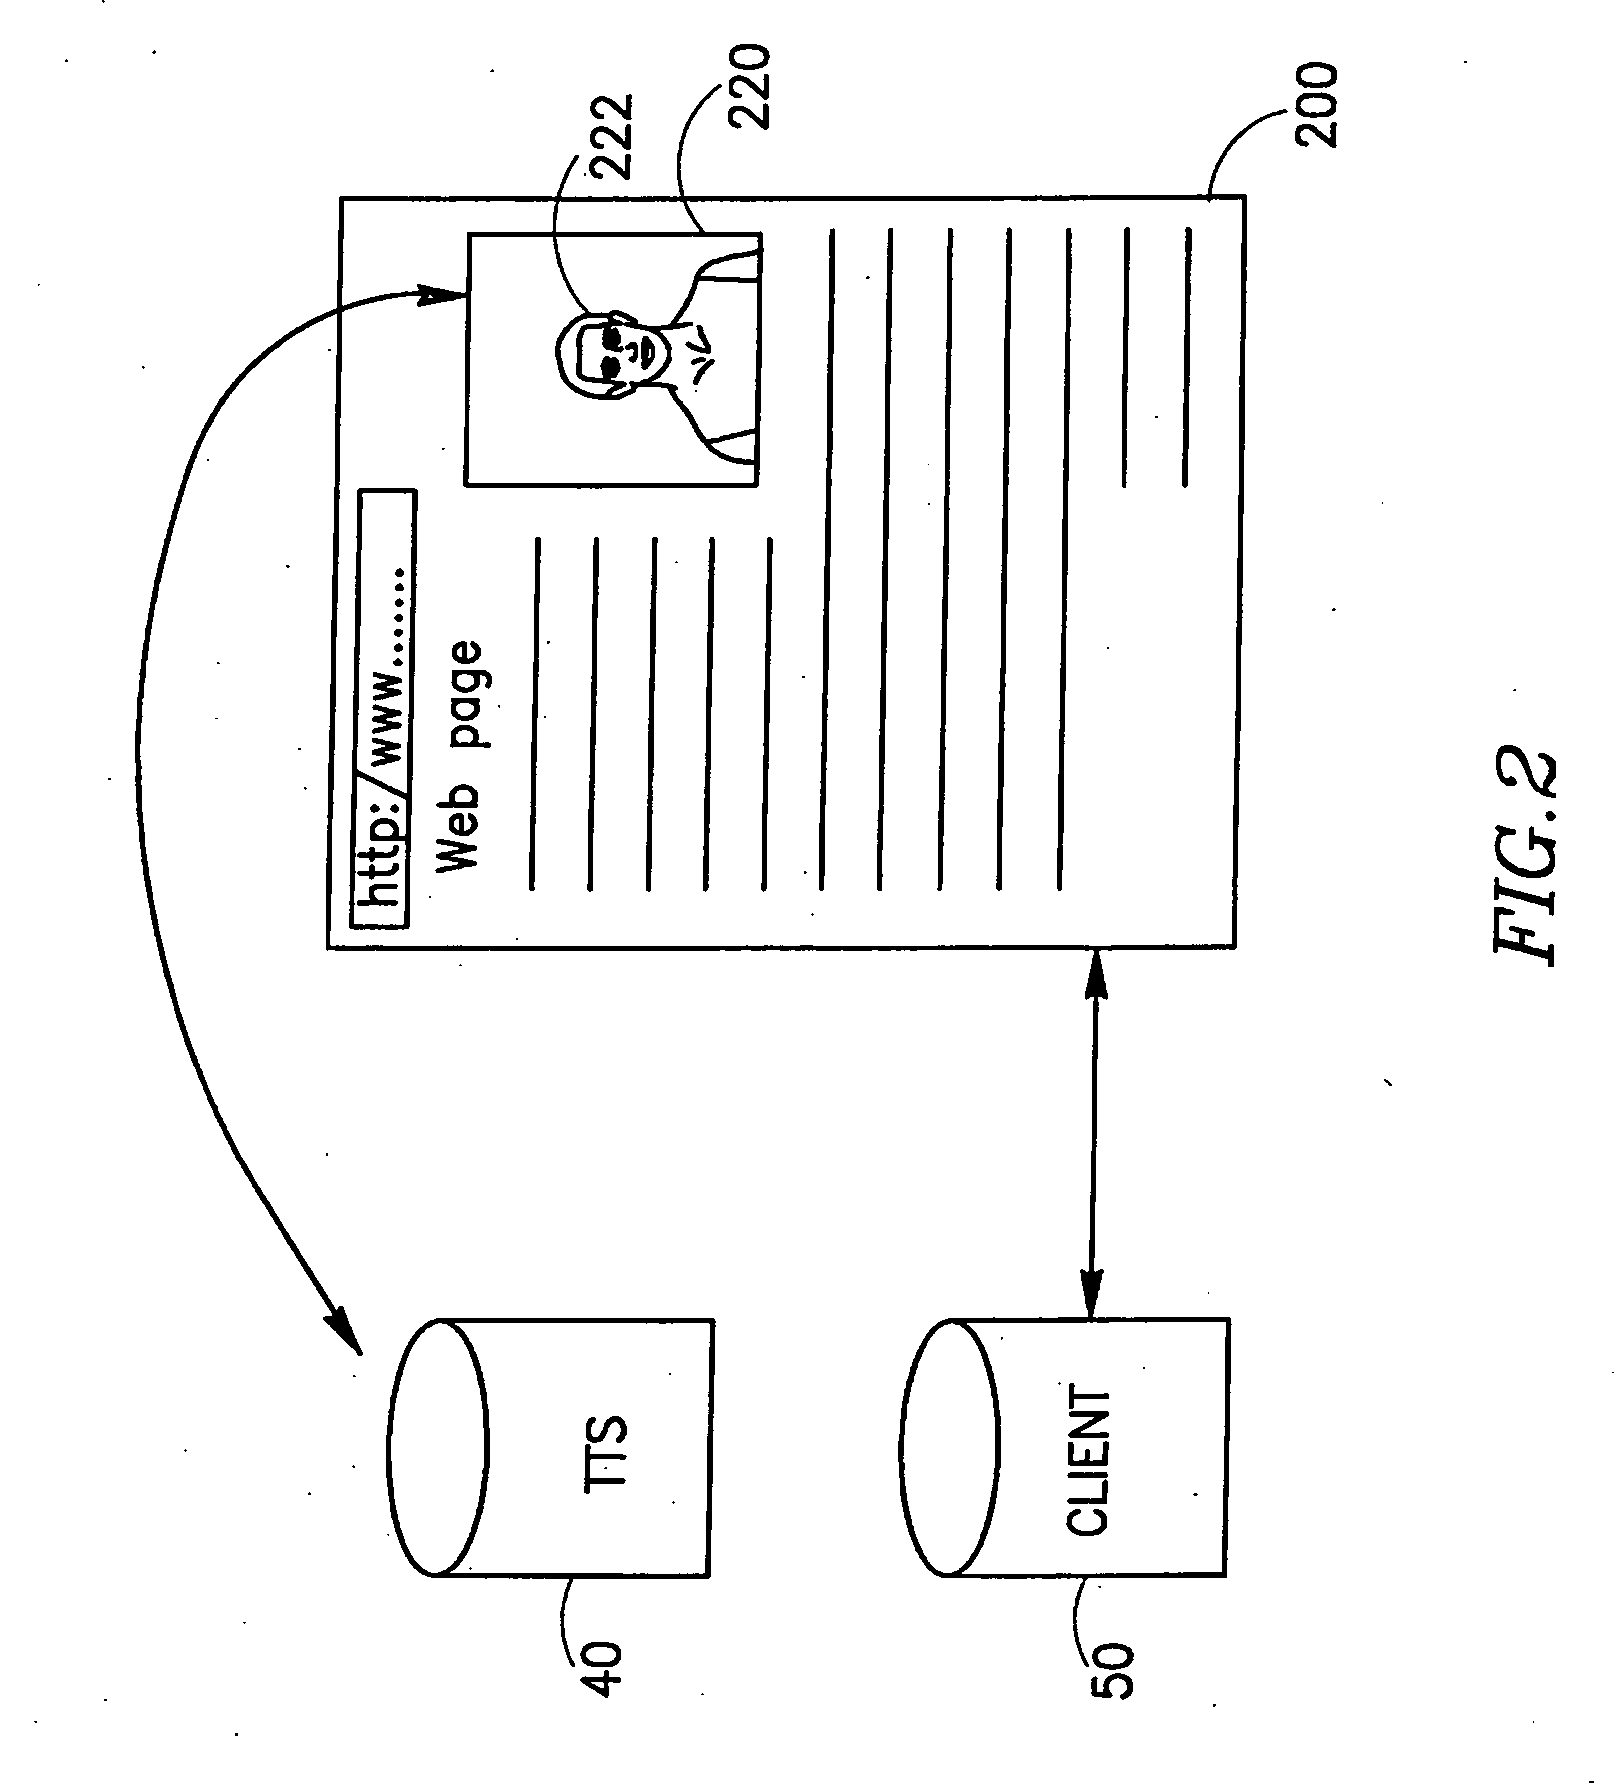 System and method for a real time client server text to speech interface